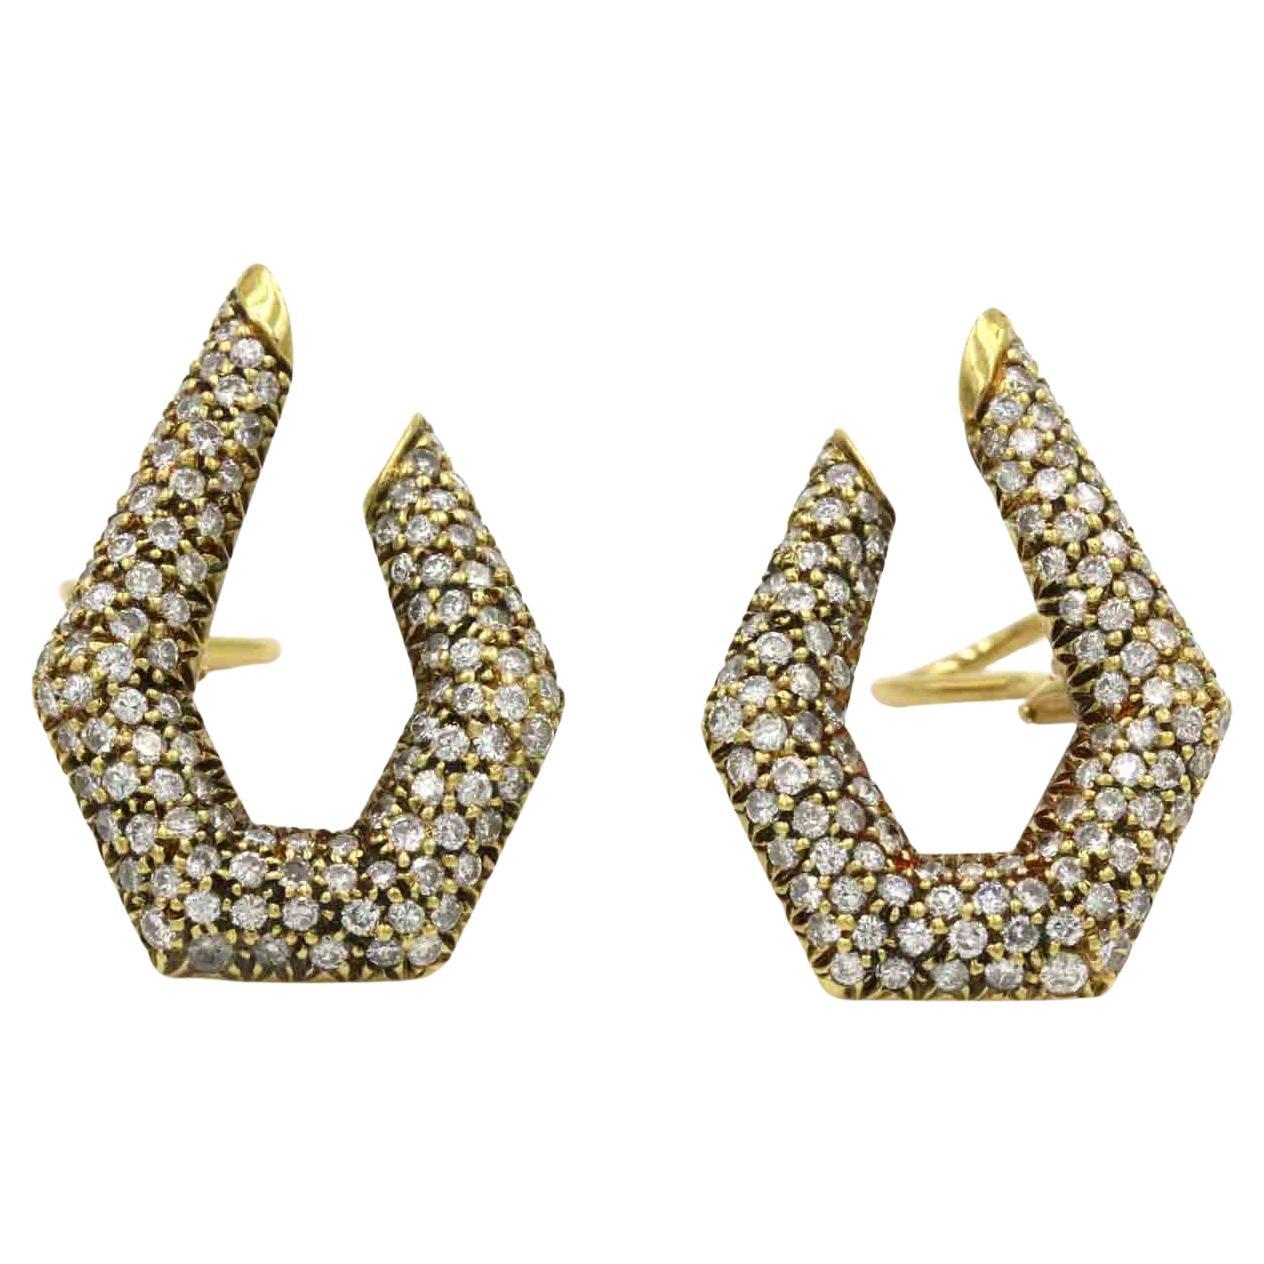 La Triumphe Pave Diamond Earrings with 4.0CTW of Diamonds in 18K Yellow Gold For Sale